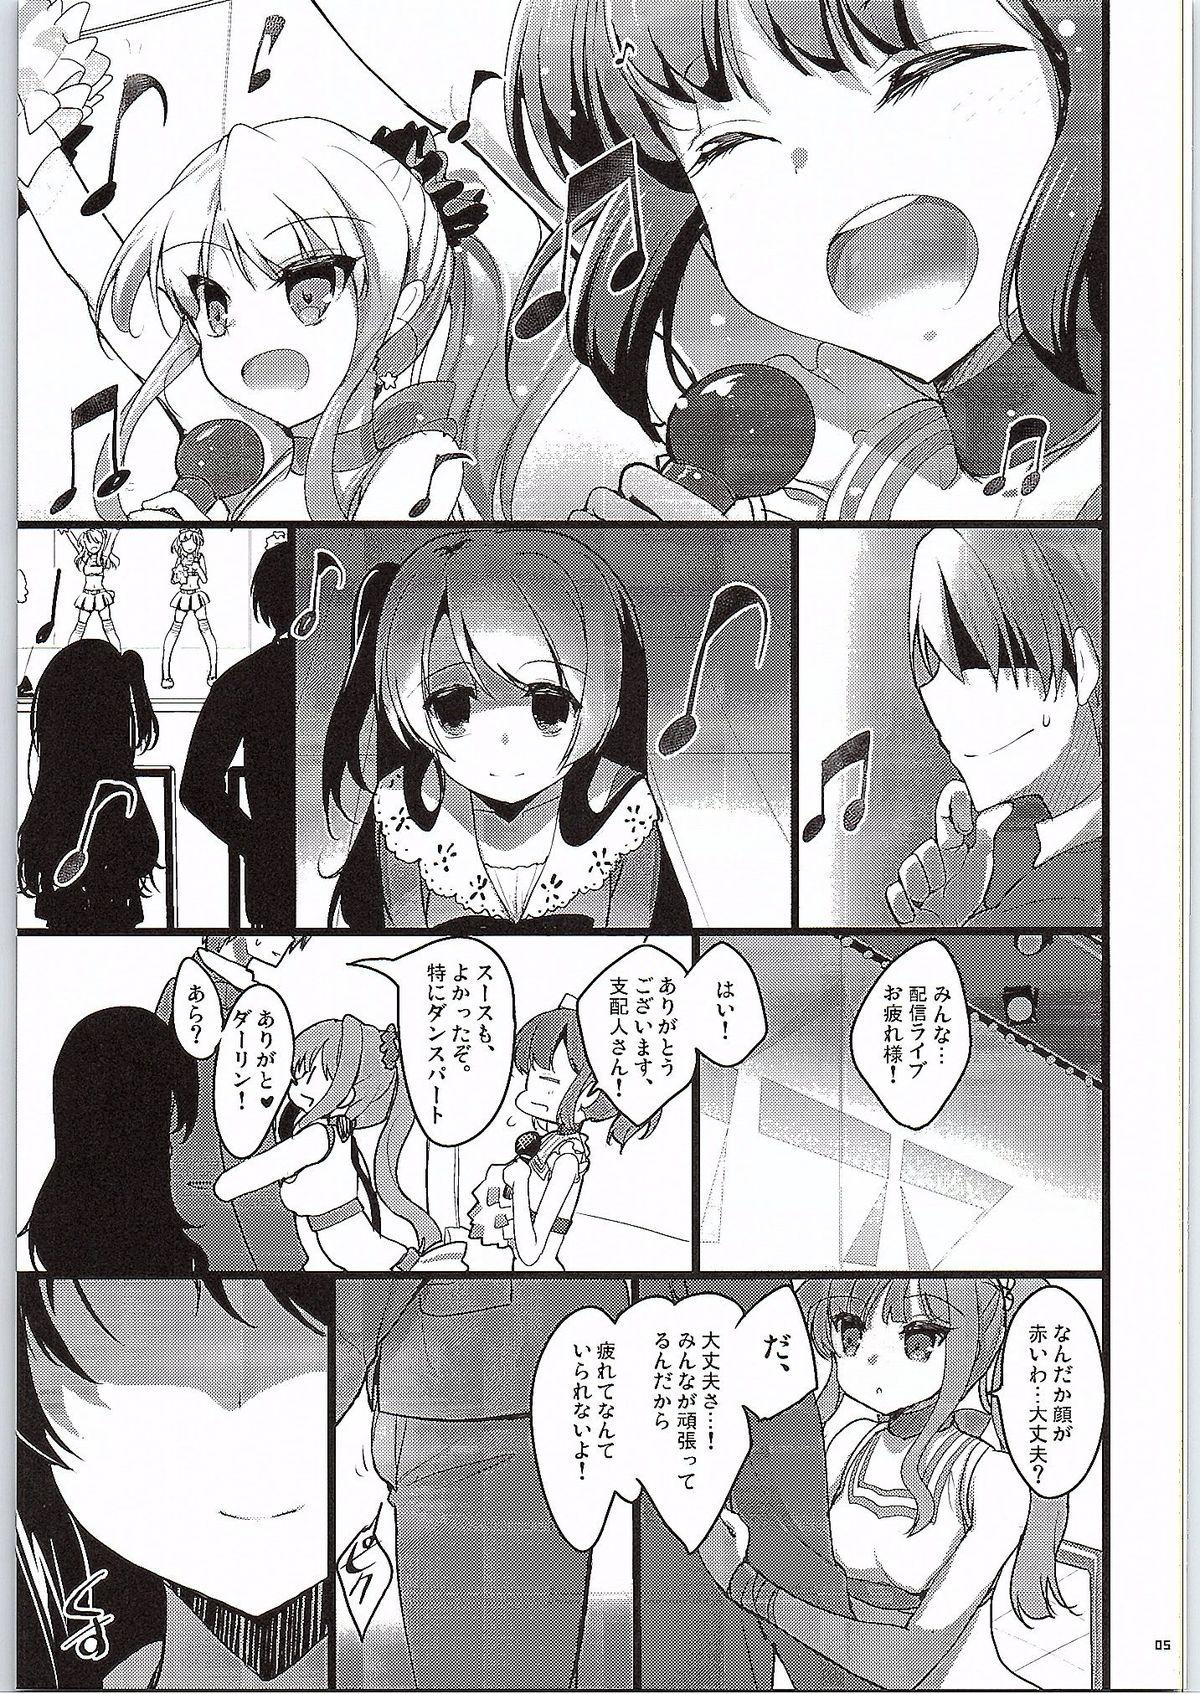 Action GOOD NIGHTMARE - Tokyo 7th sisters Submissive - Page 4